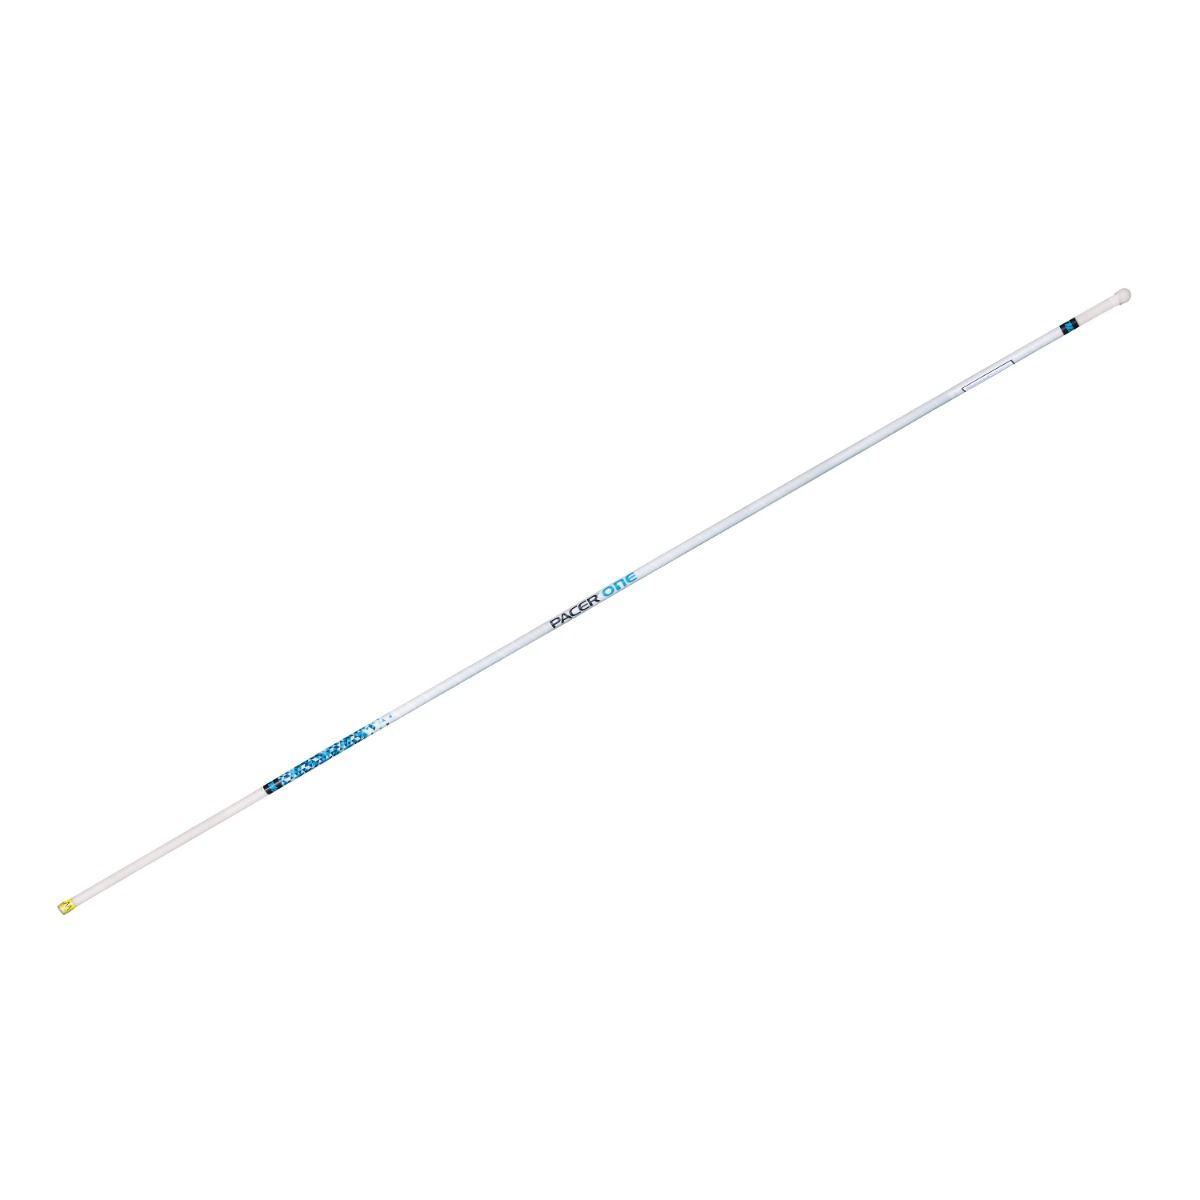 Gill 12' Pacer One Vaulting Pole